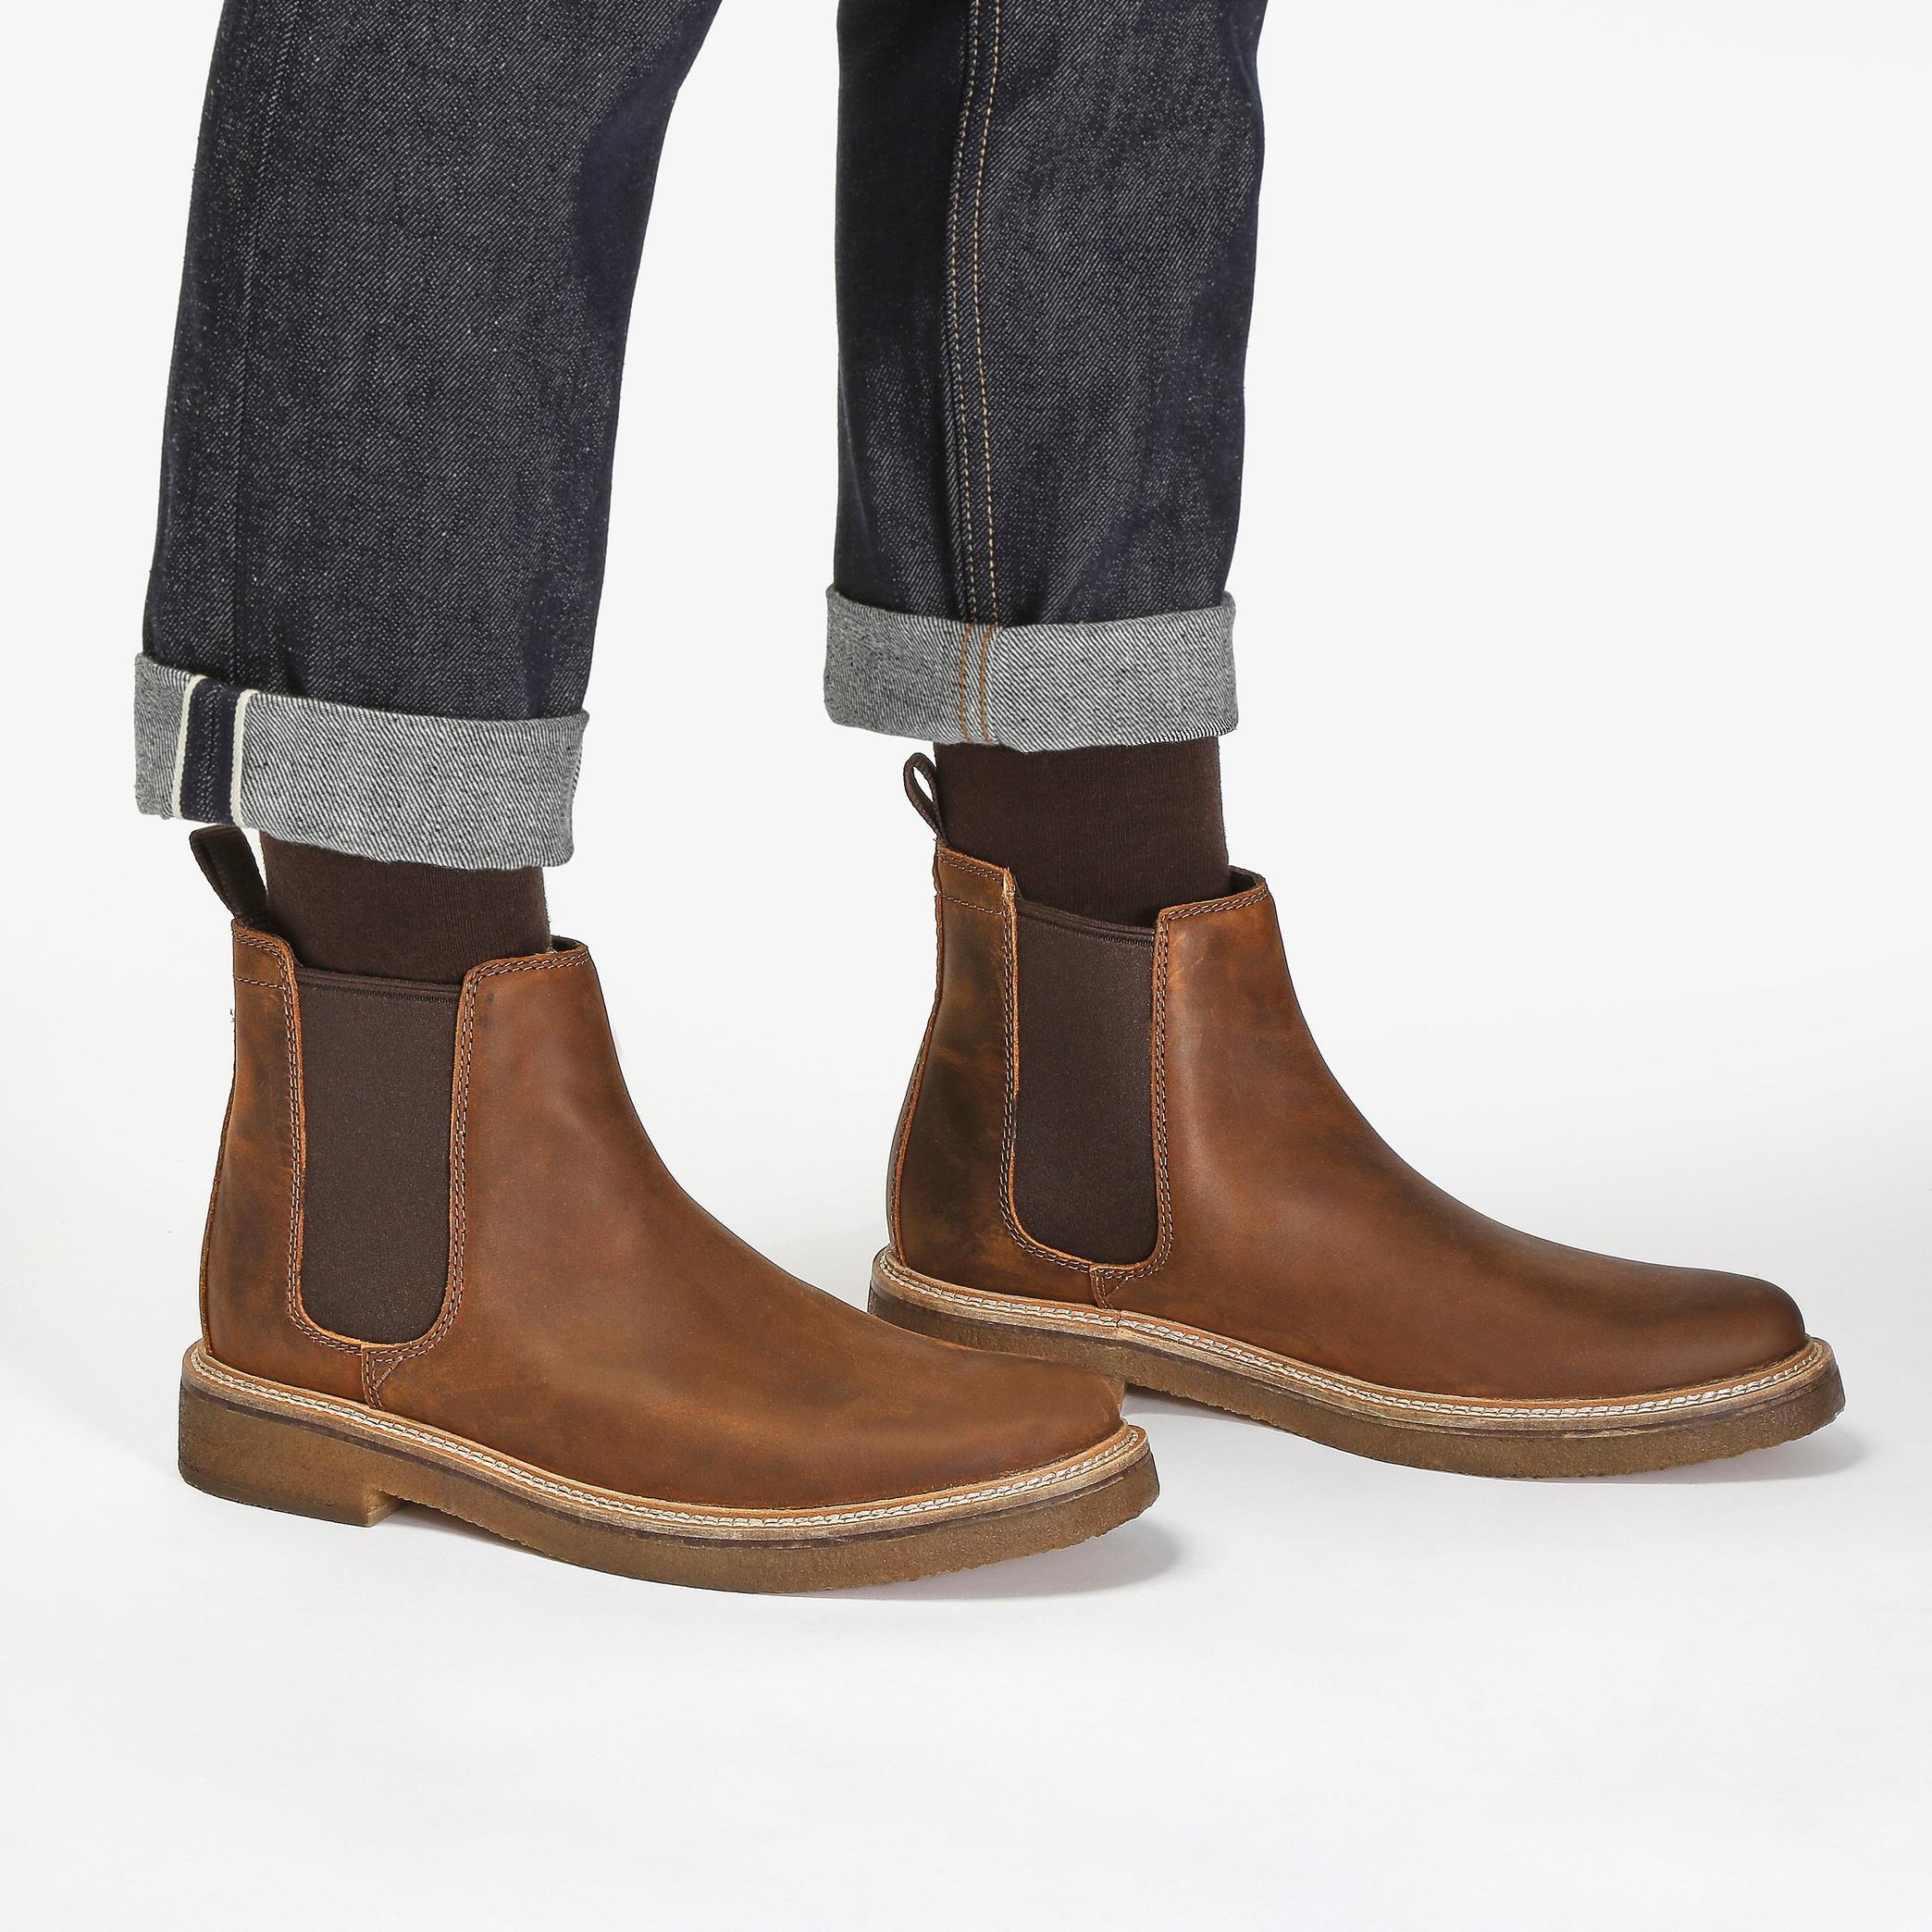 Clarkdale Easy Beeswax Leather Chelsea Boots, view 2 of 7